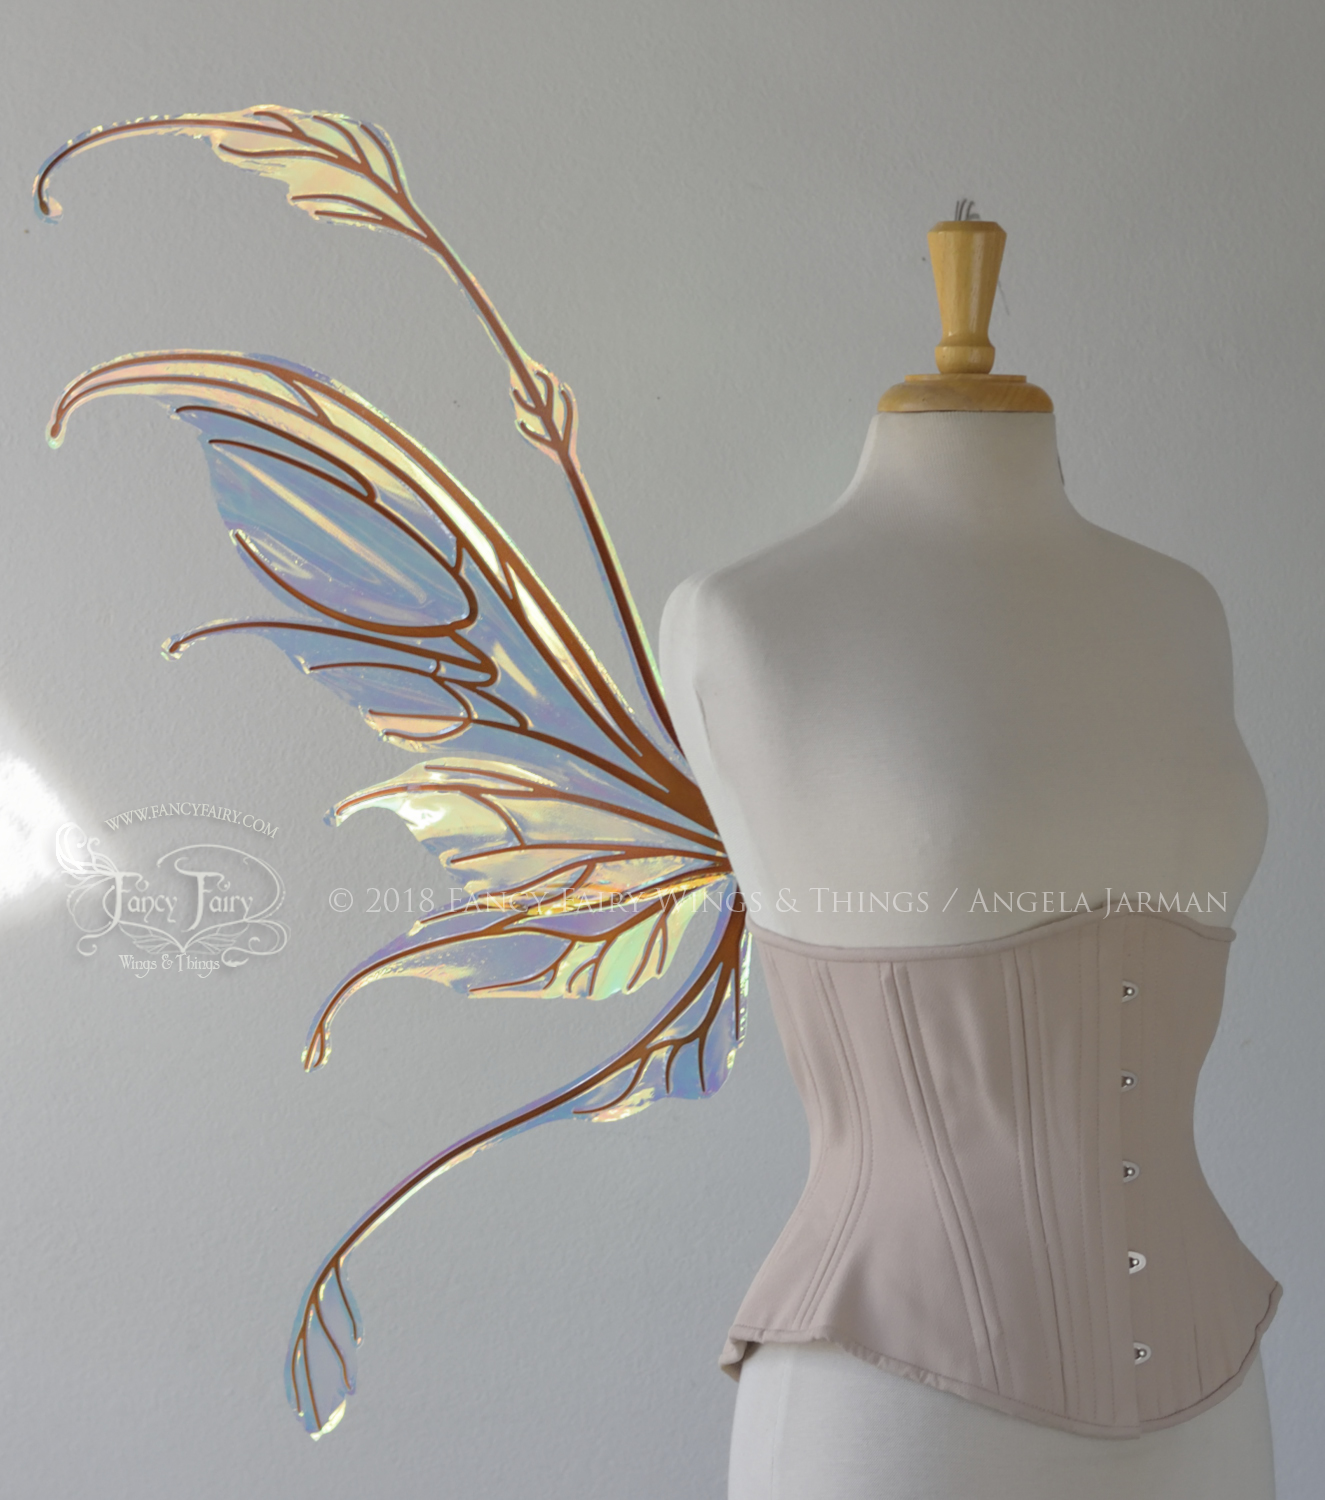 Fauna Iridescent Convertible Fairy Wings in Your Choice of Film with Copper veins